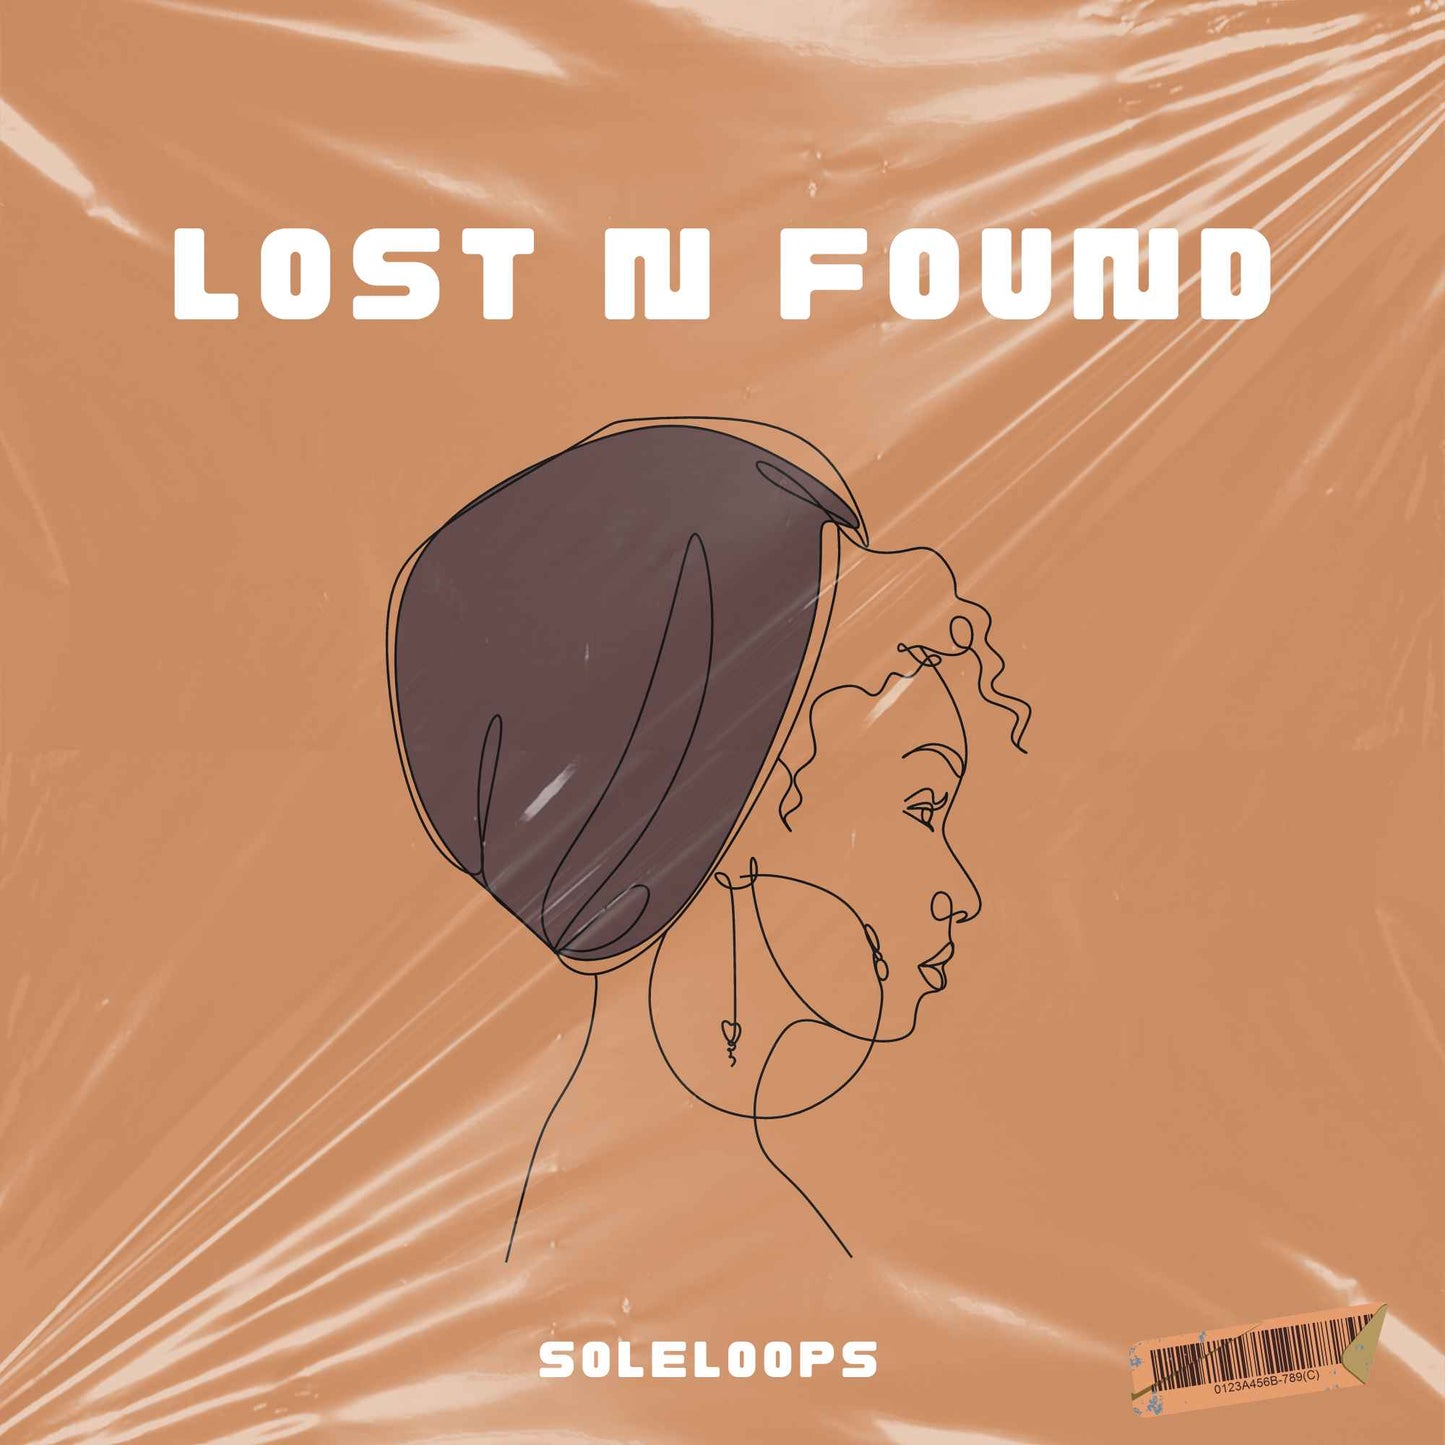 Soleloops USG - "Lost and Found" mini